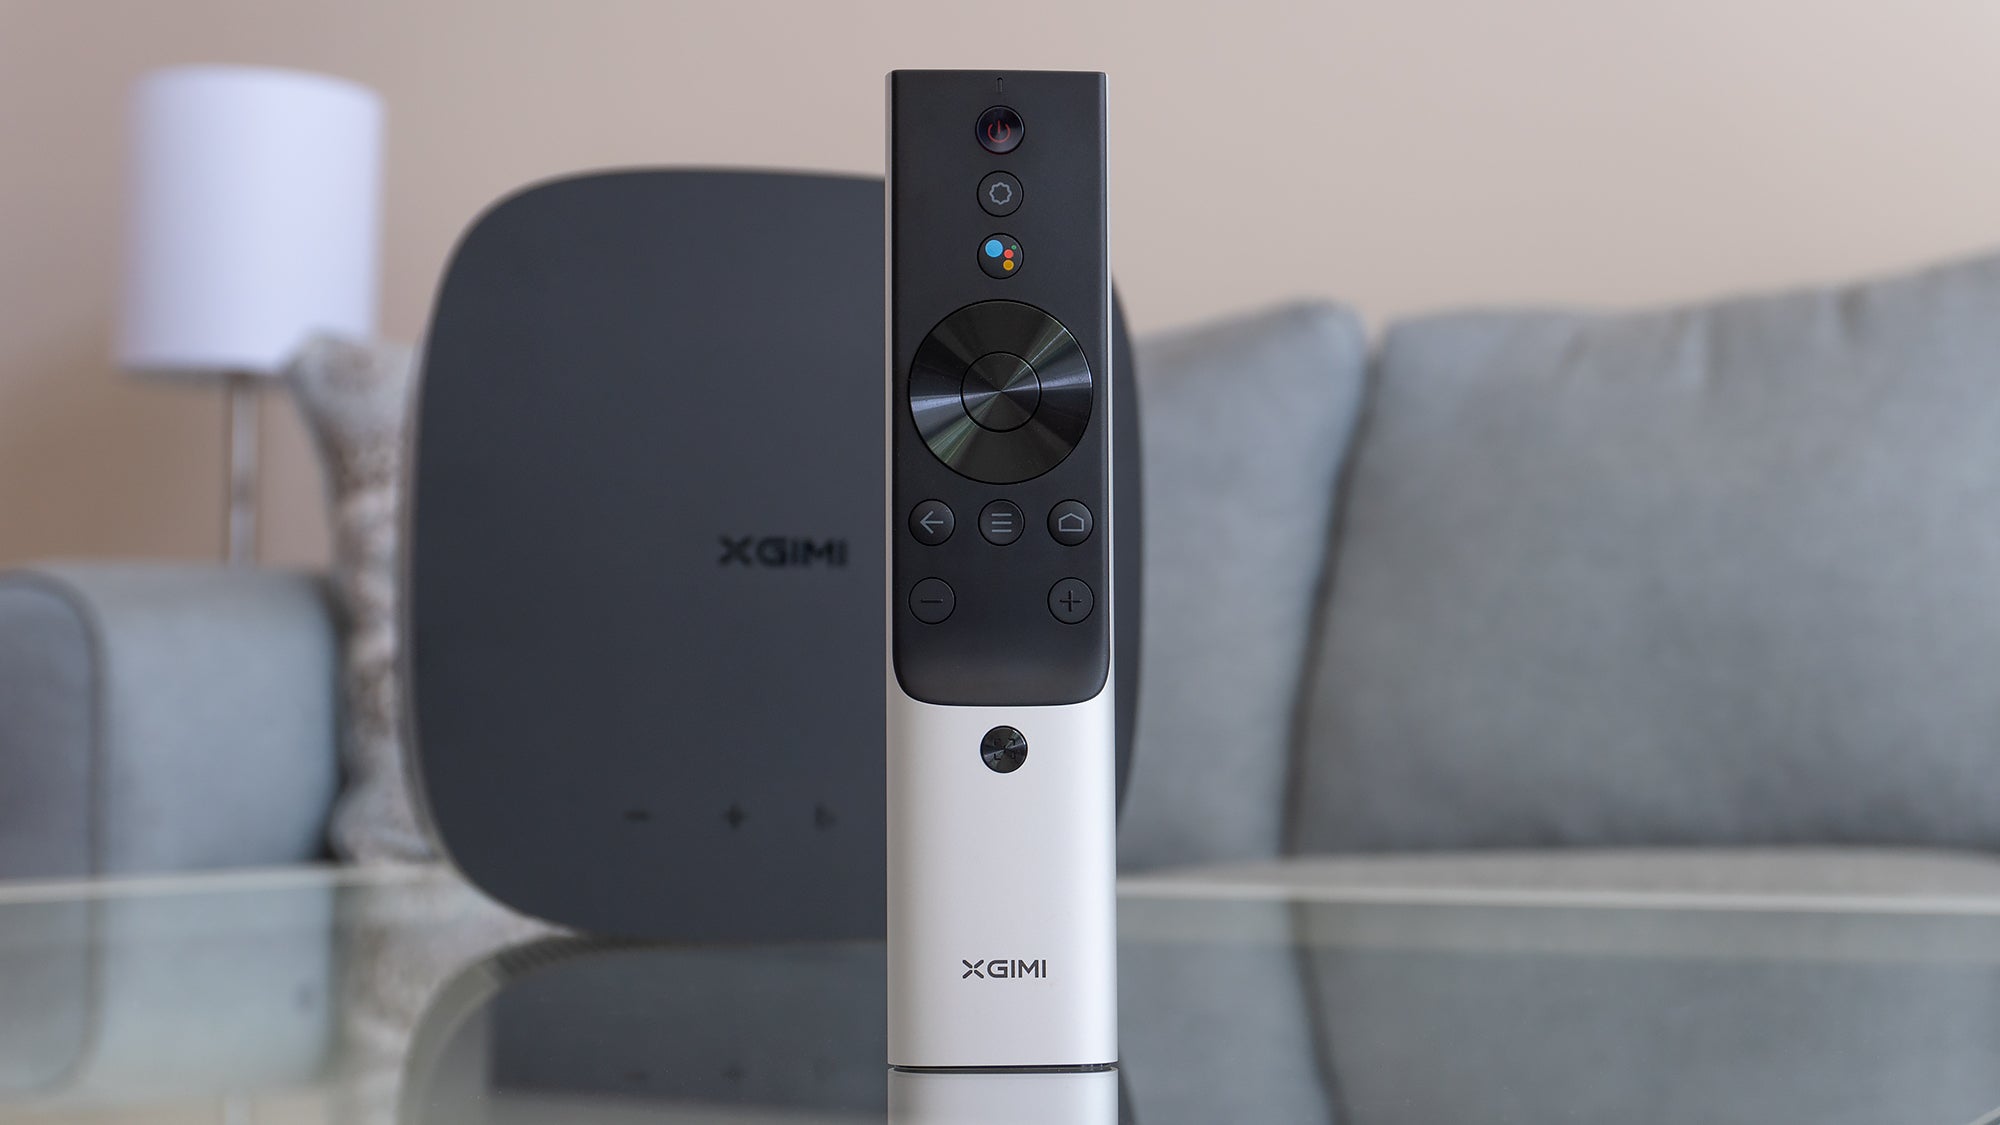 The remote XGIMI has included is surprisingly excellent, and even features a lovely brushed metal finish. (Photo: Andrew Liszewski/Gizmodo)